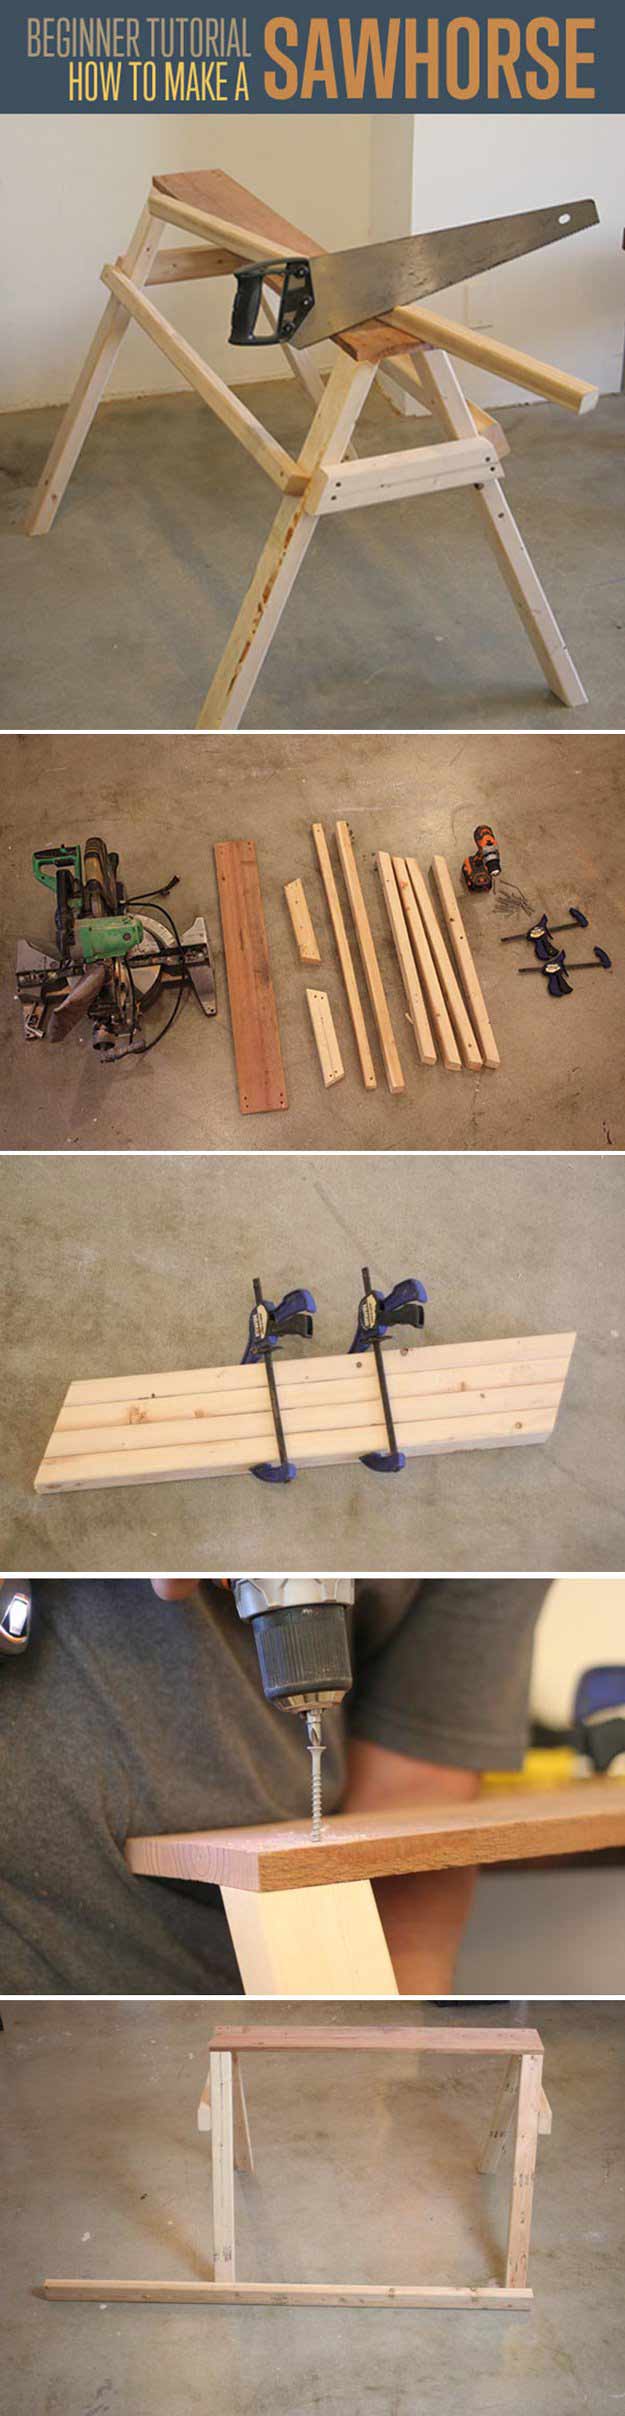 Easy Woodworking Projects DIY Projects Do It Yourself